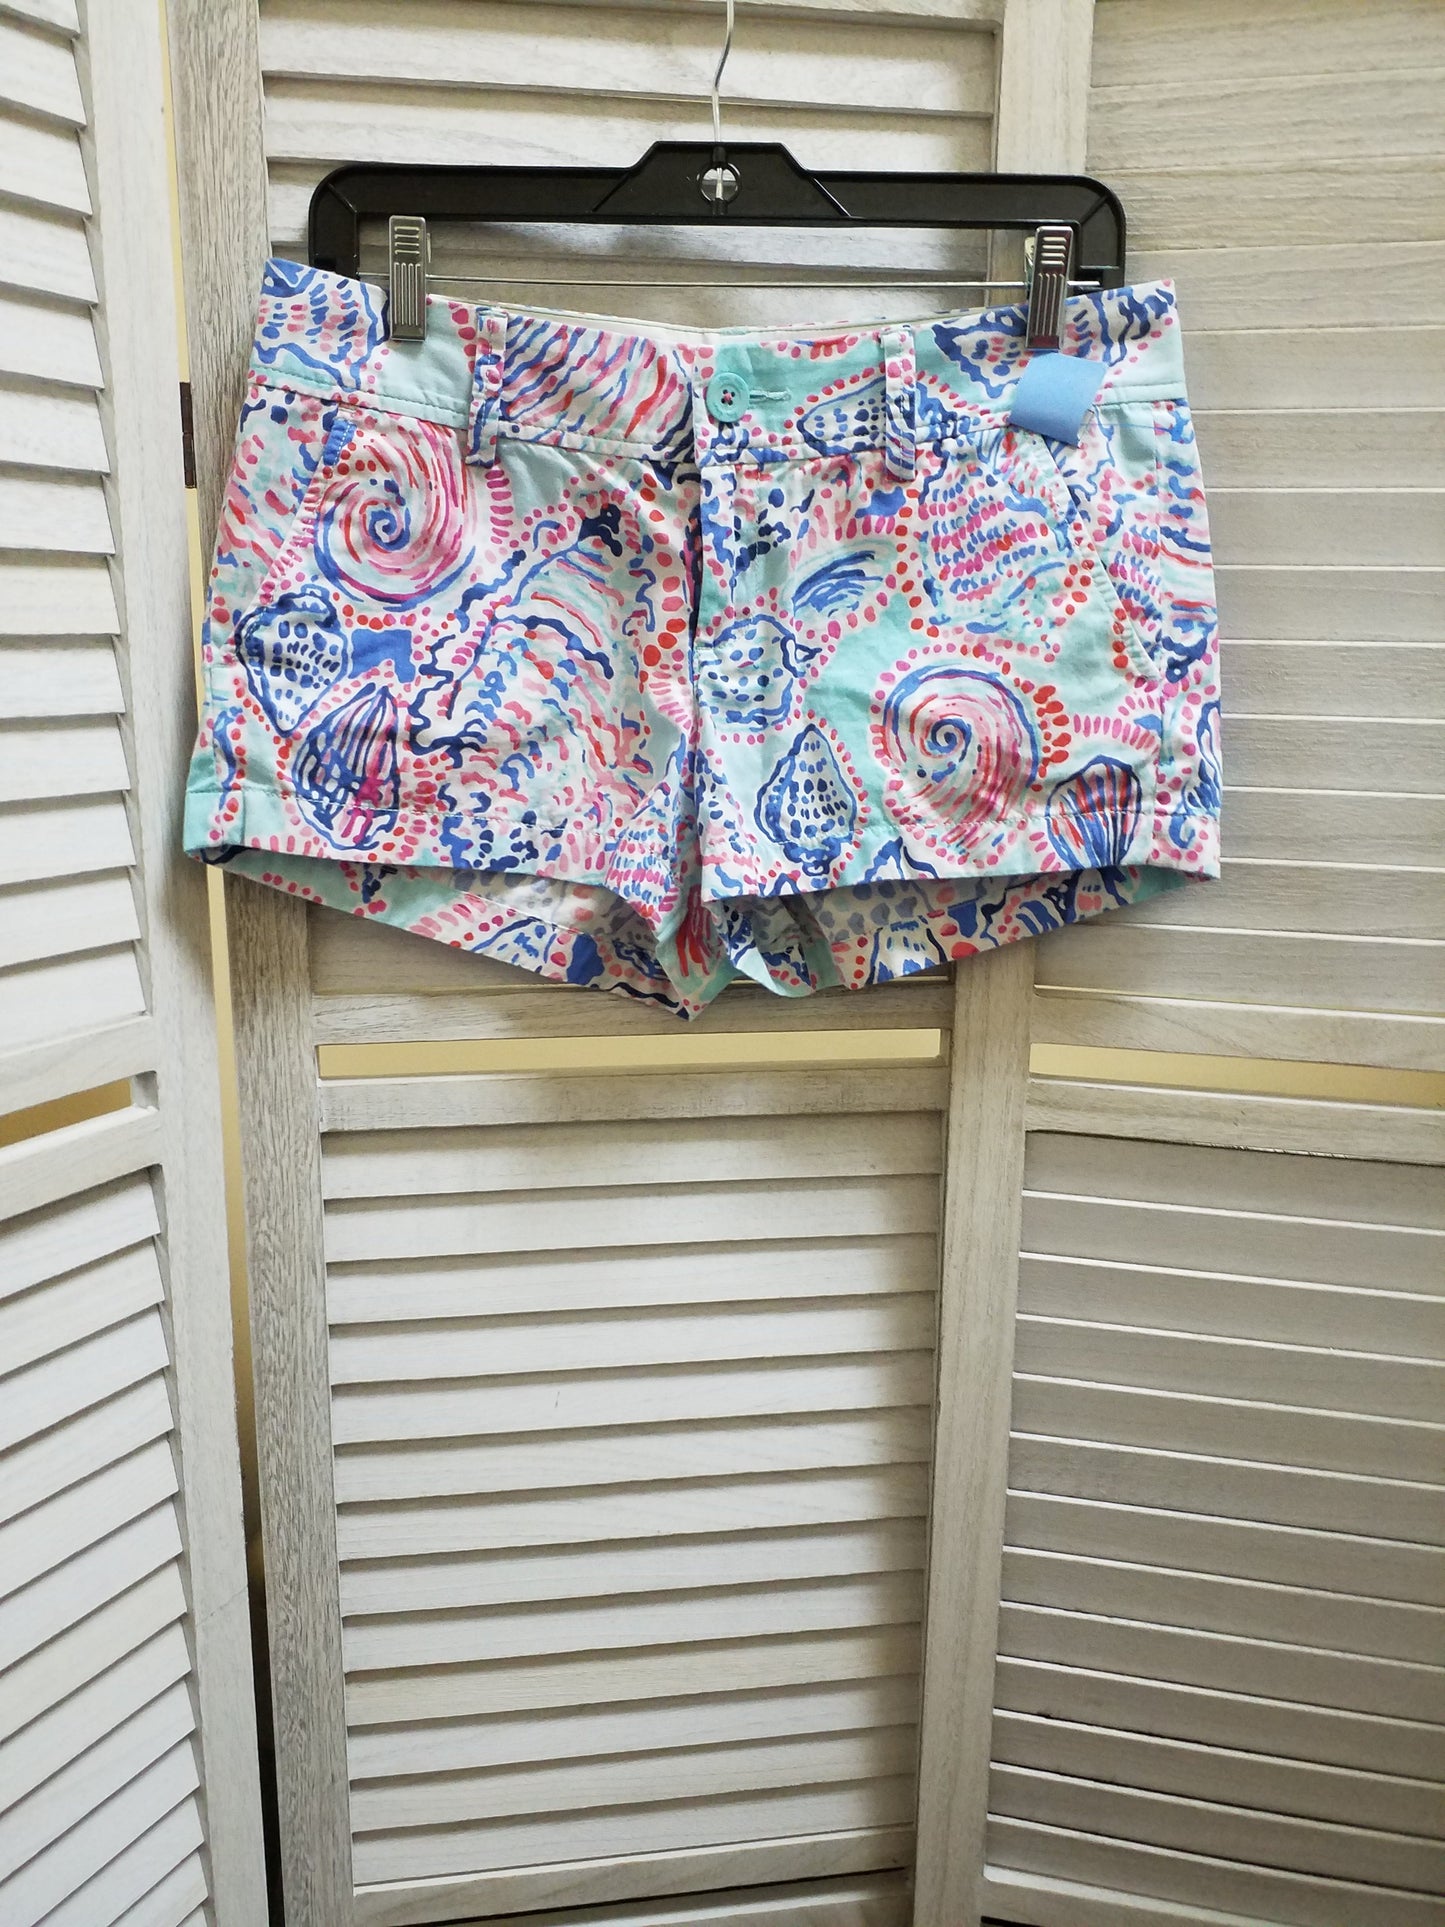 Shorts By Lilly Pulitzer  Size: S